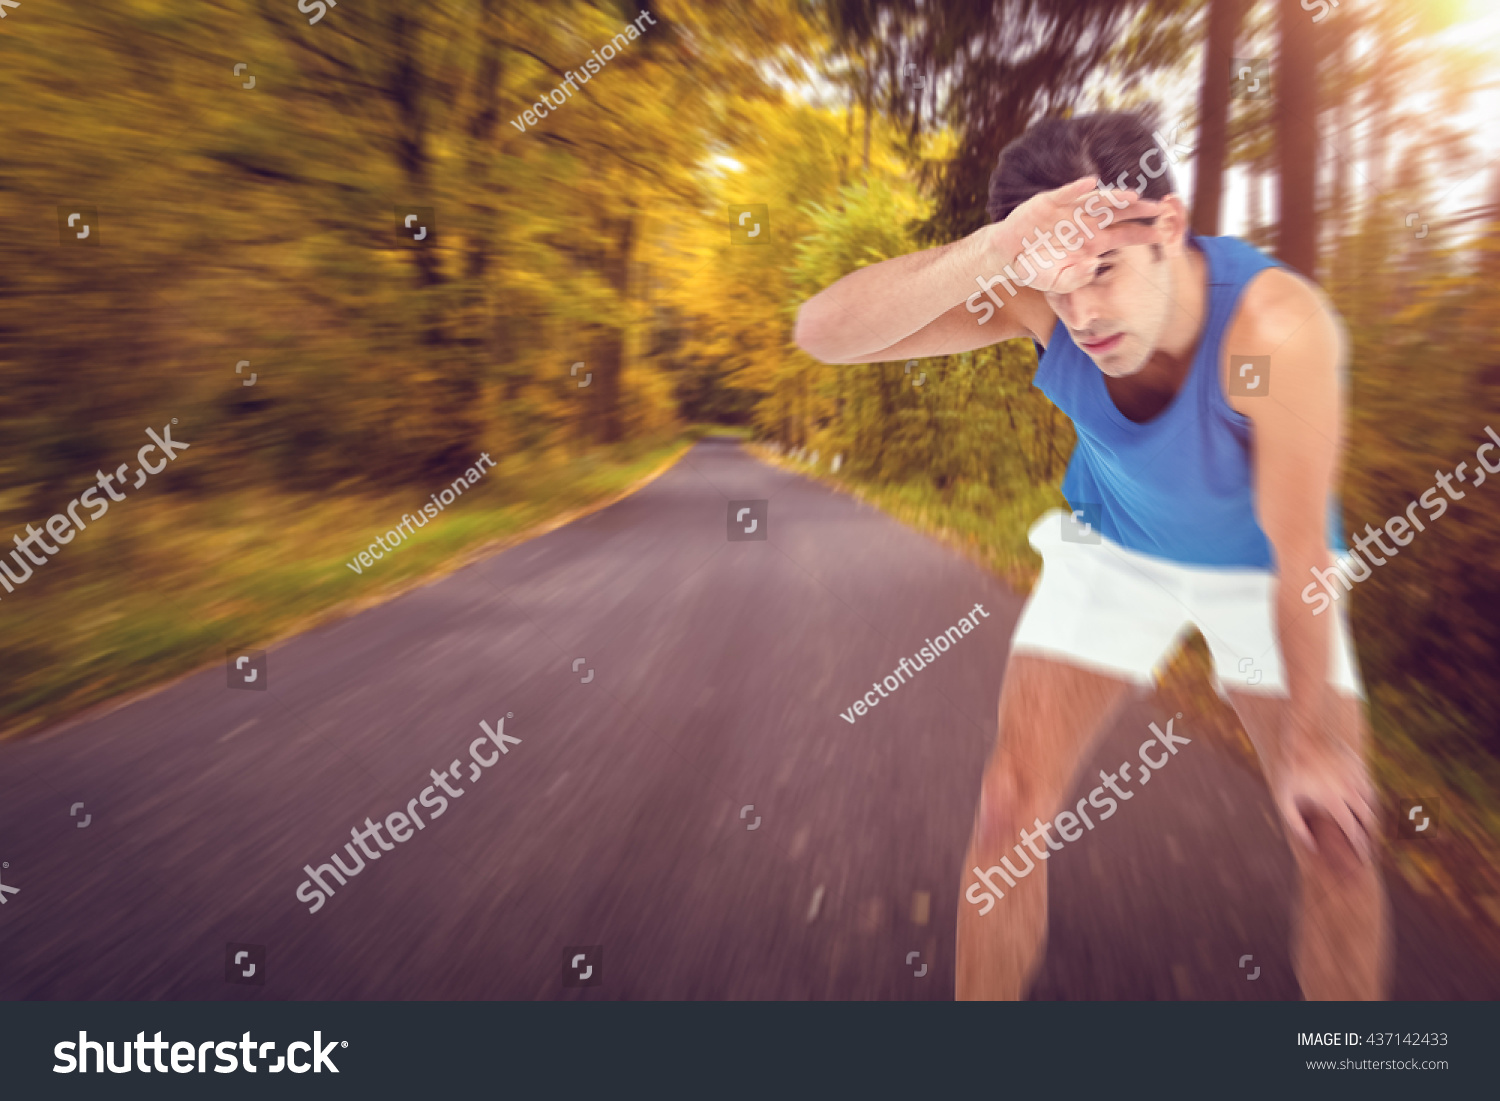 Tired athlete wiping his sweat with hand against country road along trees in the lush forest #437142433